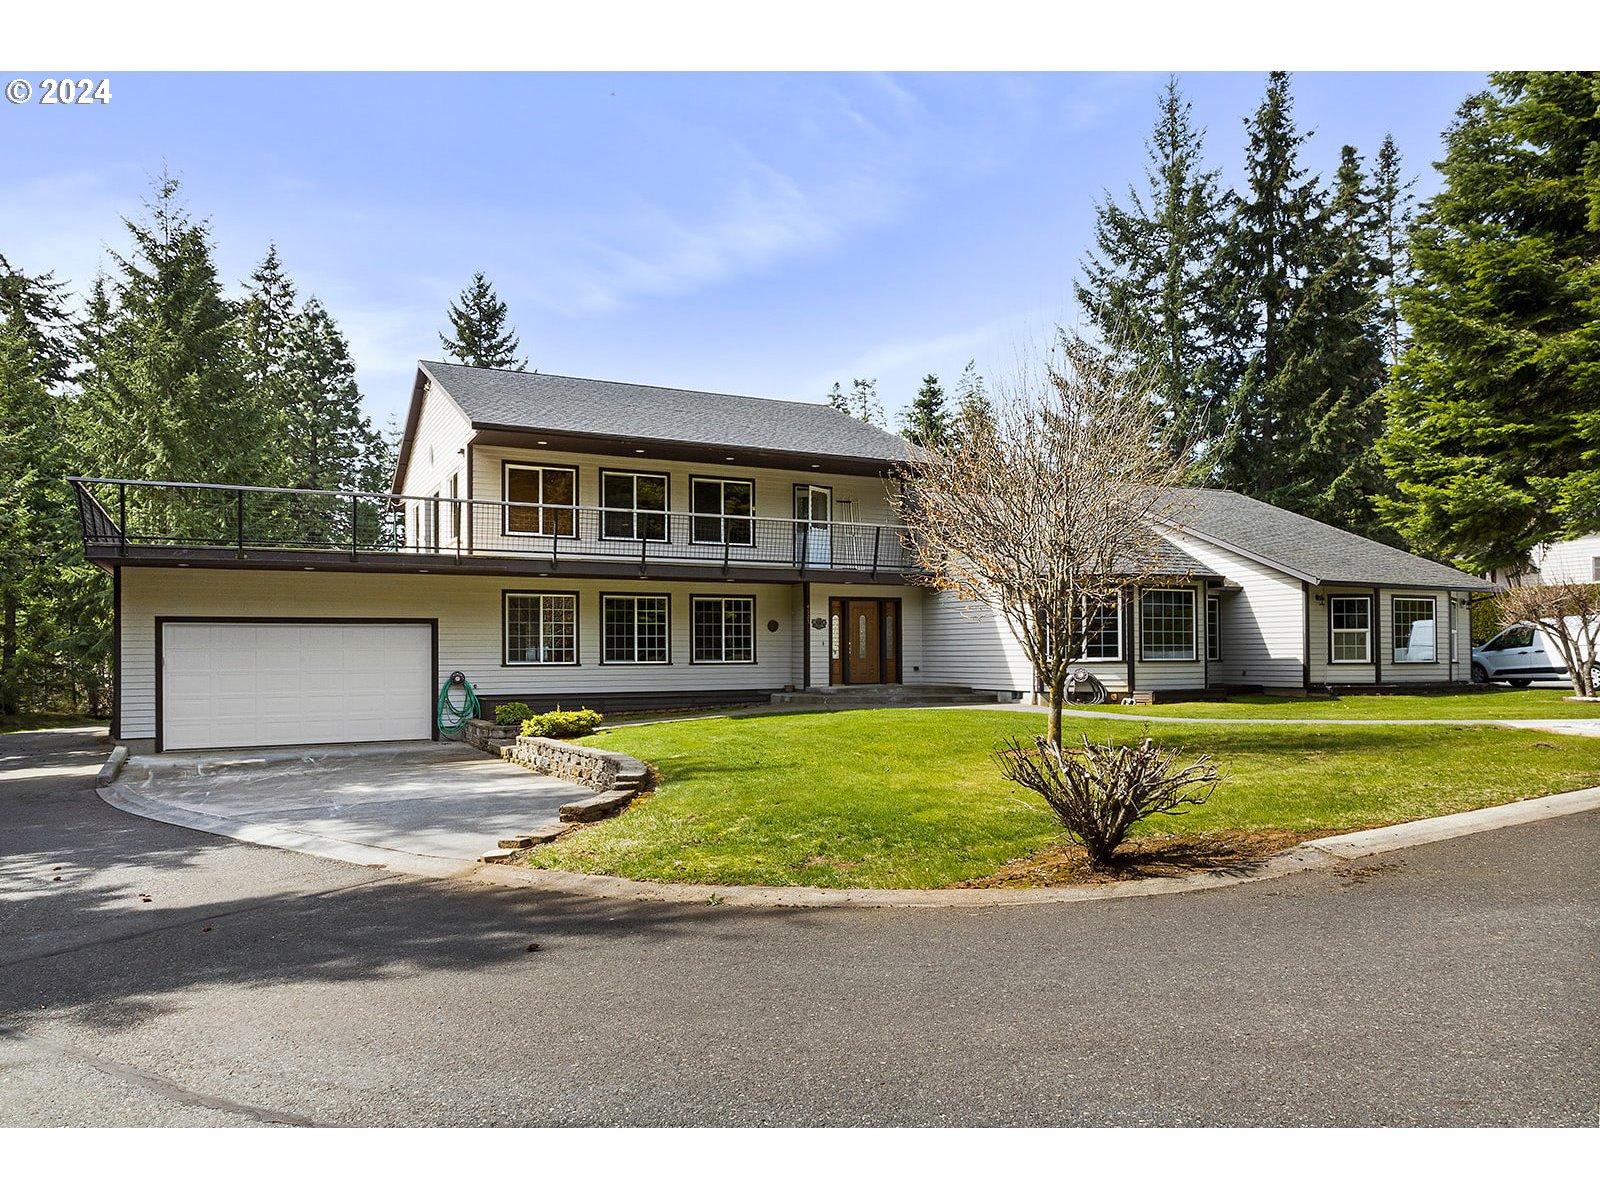 4125 GREEN MOUNTAIN DR, Mt Hood Prkdl, OR 97041